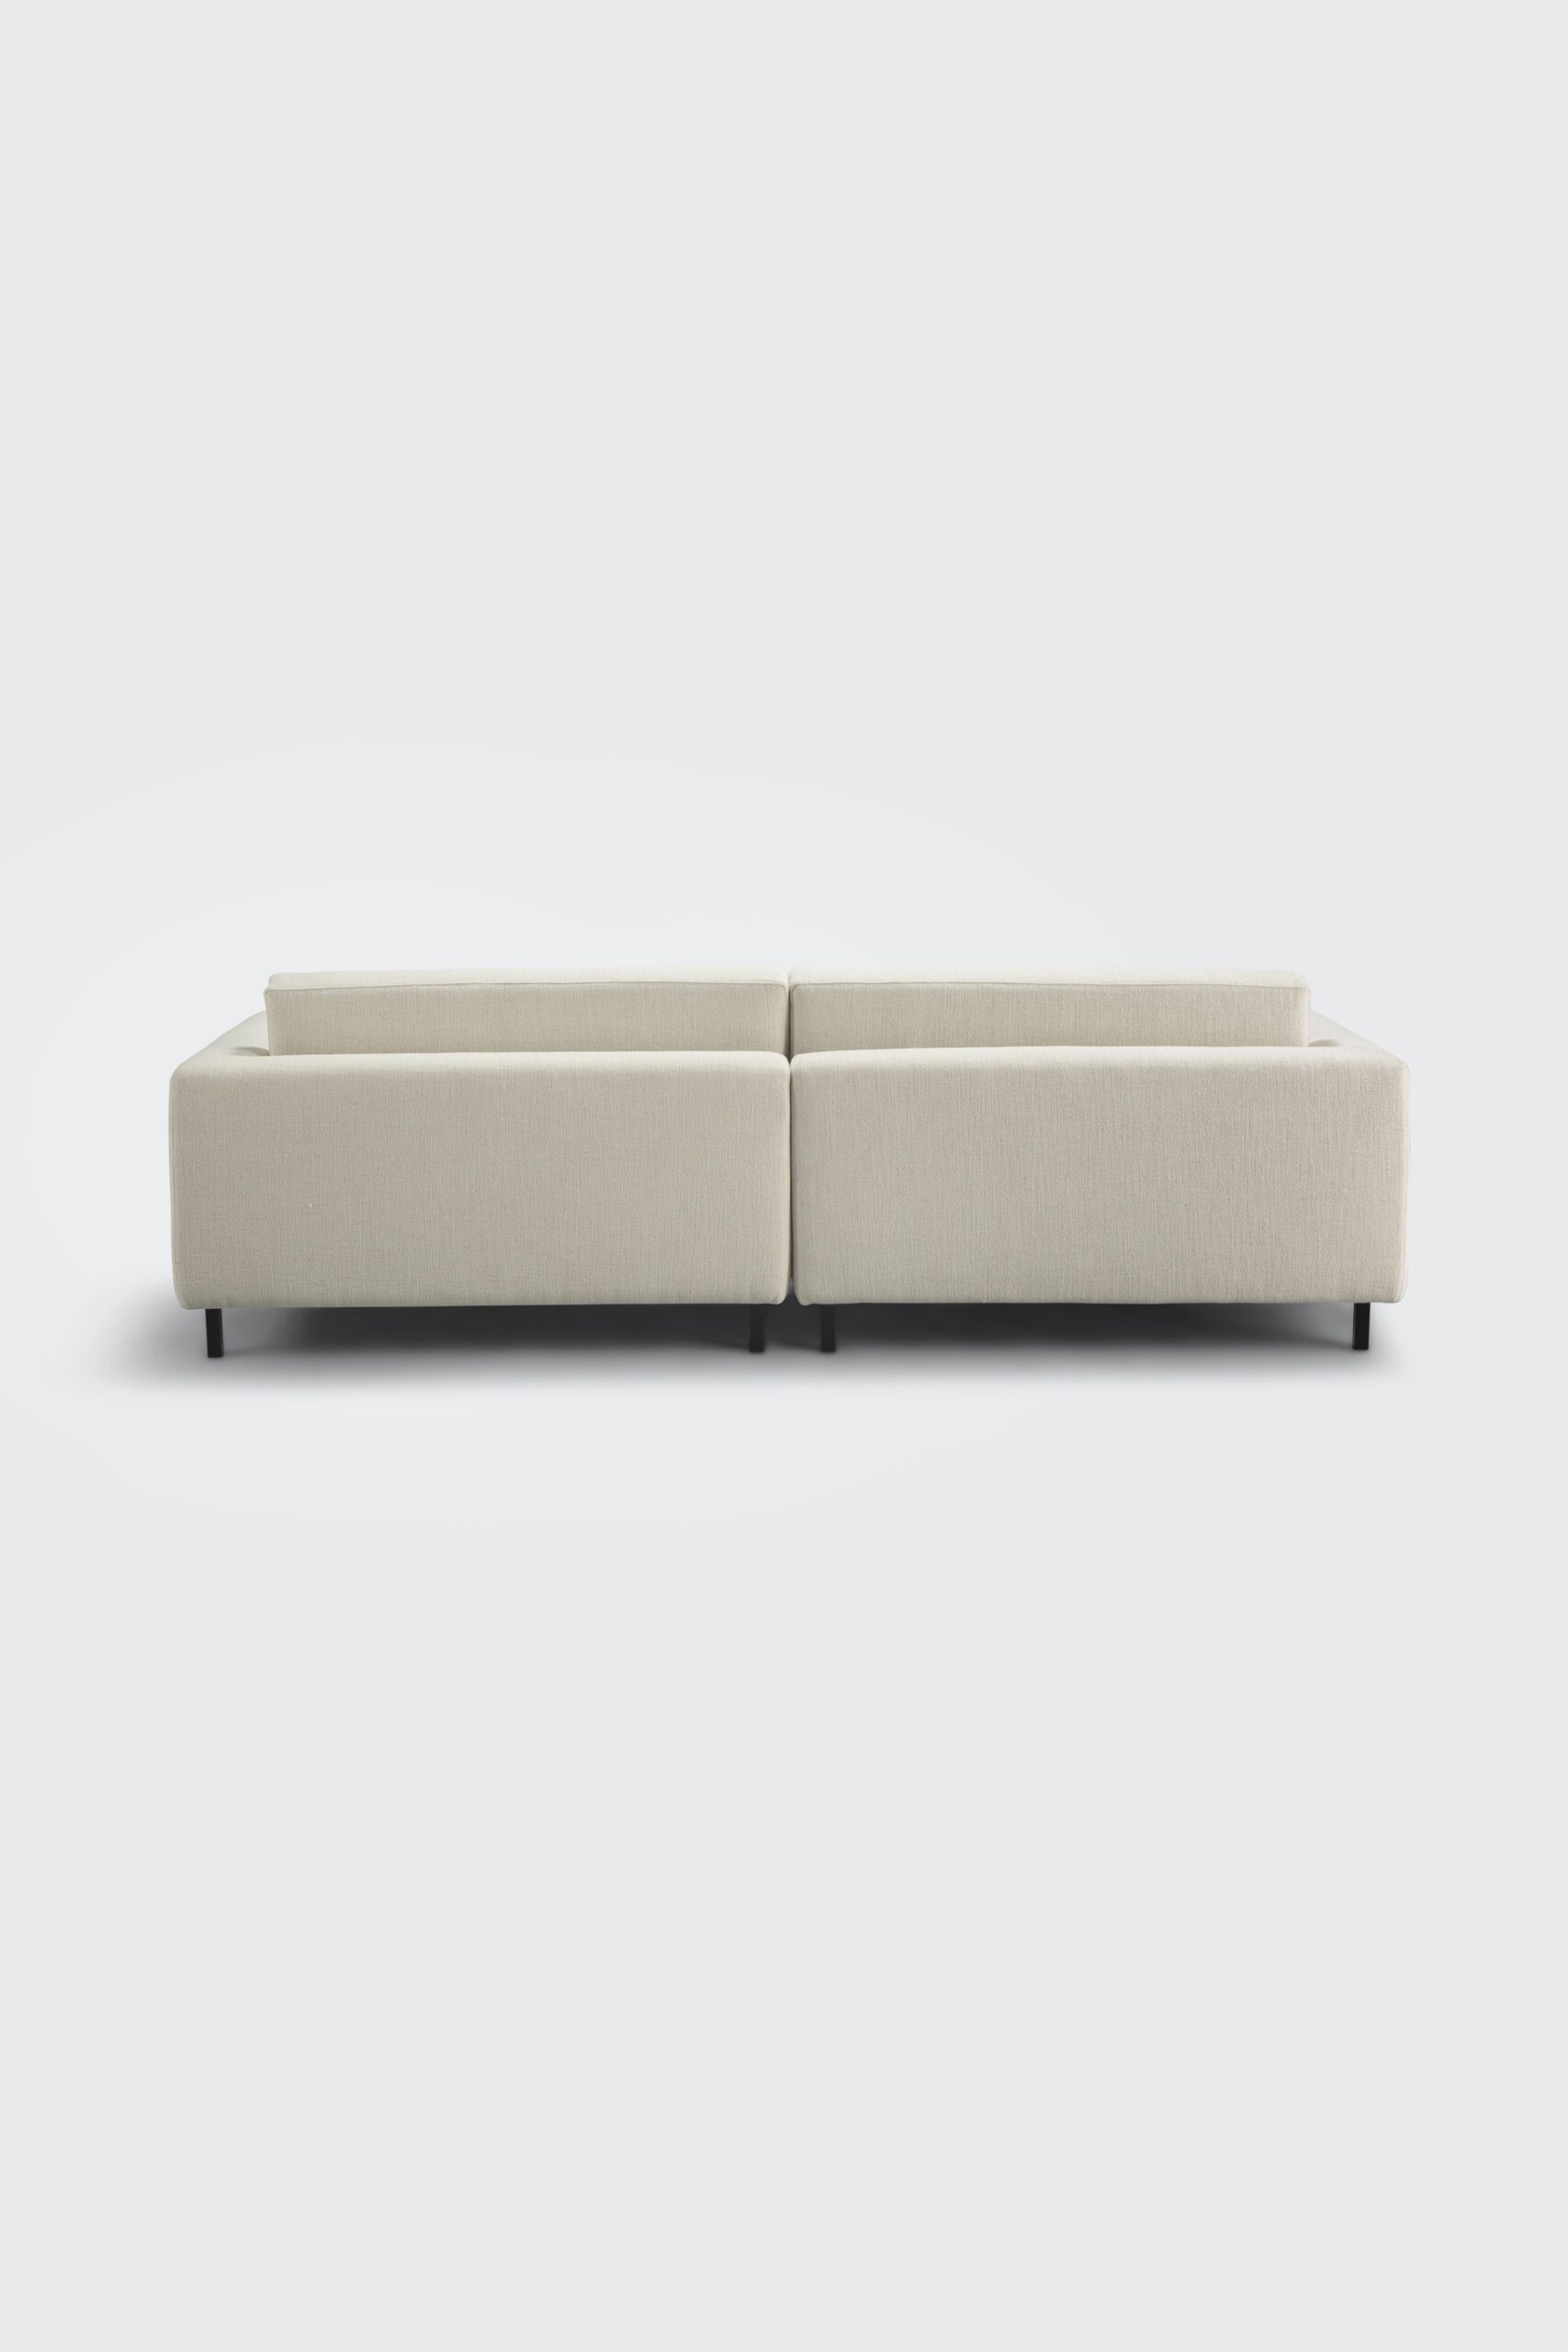 SAV sofa timeless 320 cream interior design architecture product furniture luxury_resistant style living room noble lined 320cm decor two separated modules timeless collection